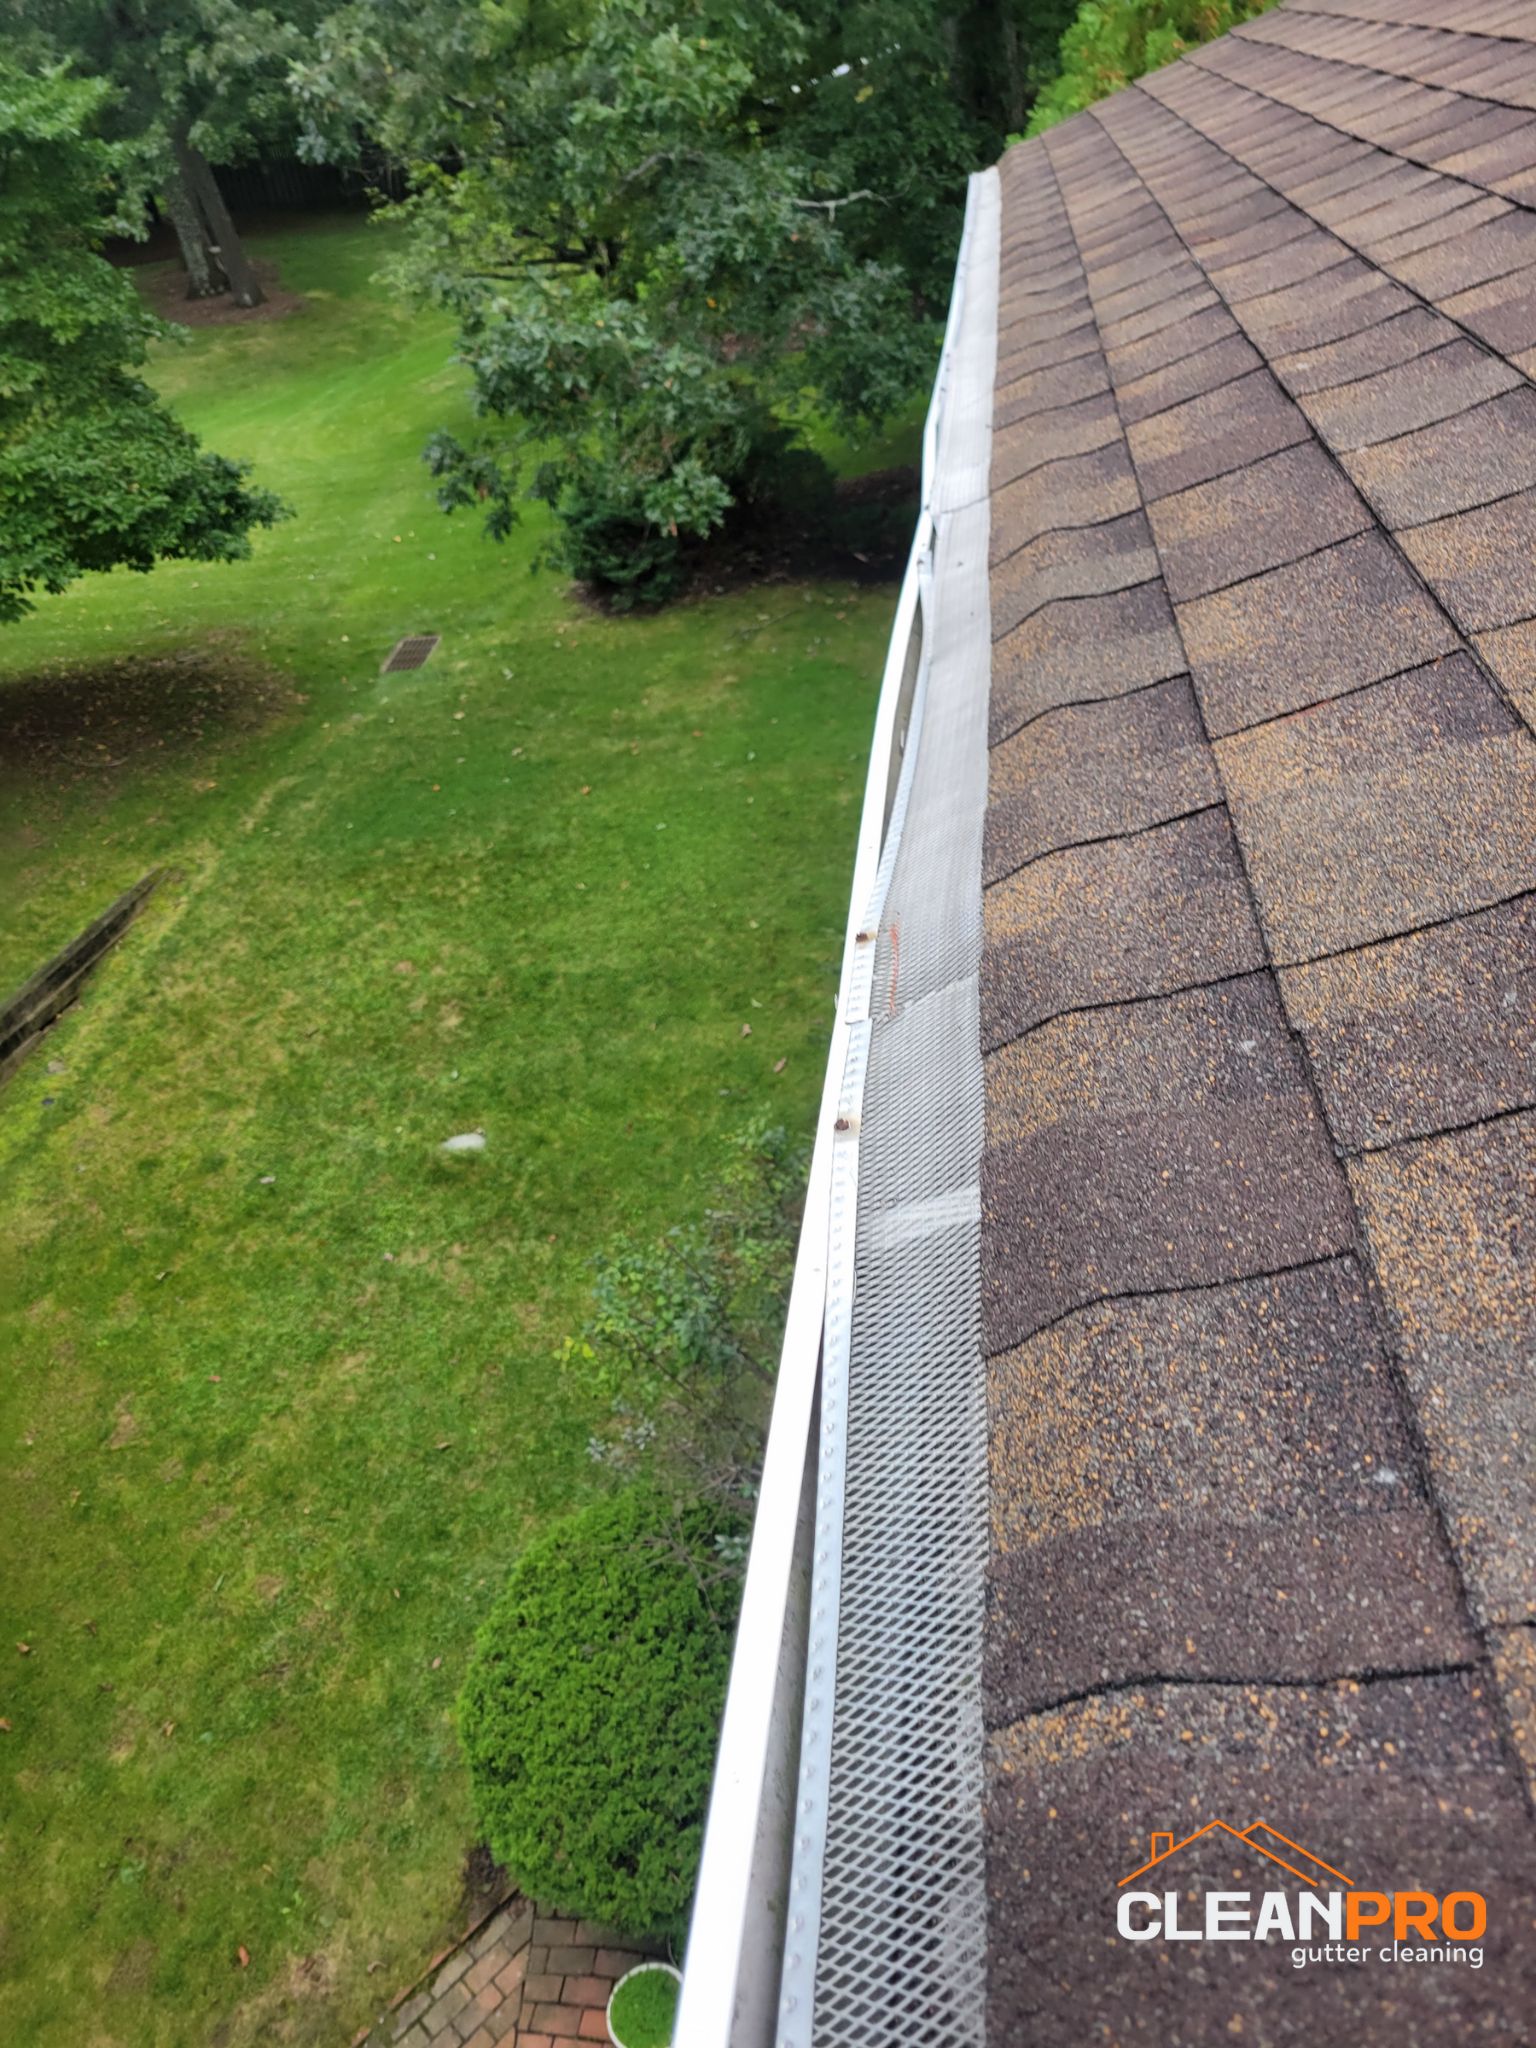 Quality Gutter Cleaning in Wilmington NC